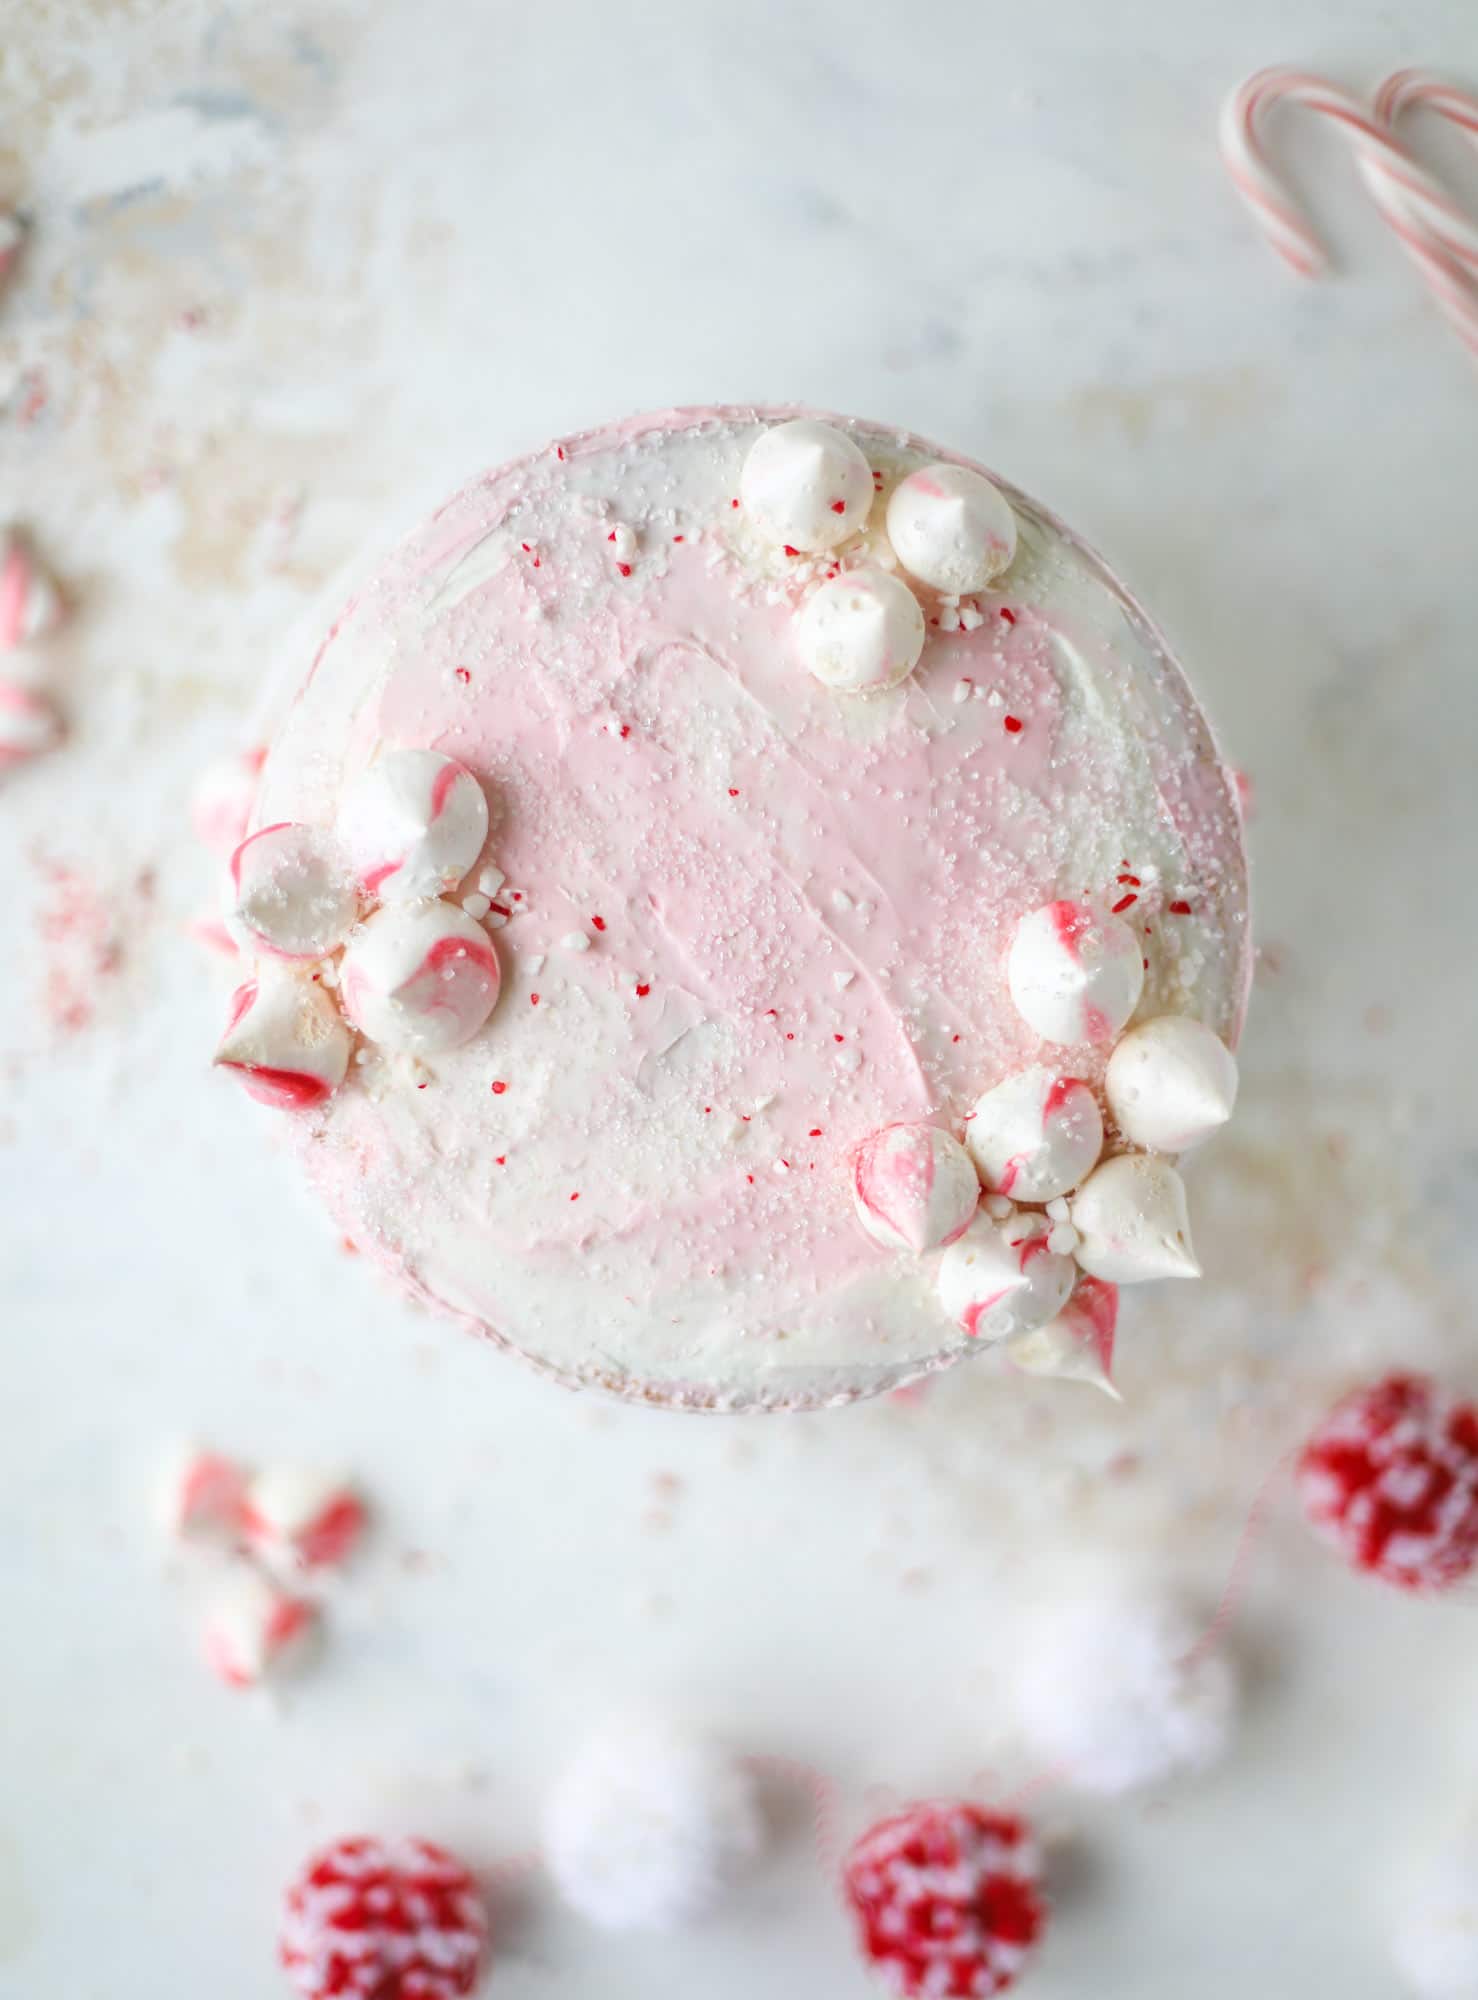 This pink peppermint cake is festive and delicious for the holidays! Layers of vanilla cake frosting with peppermint cream cheese frosting, covered in sparkly sugar and peppermint meringues. Couldn't be cuter! I #pinkpeppermint #cake